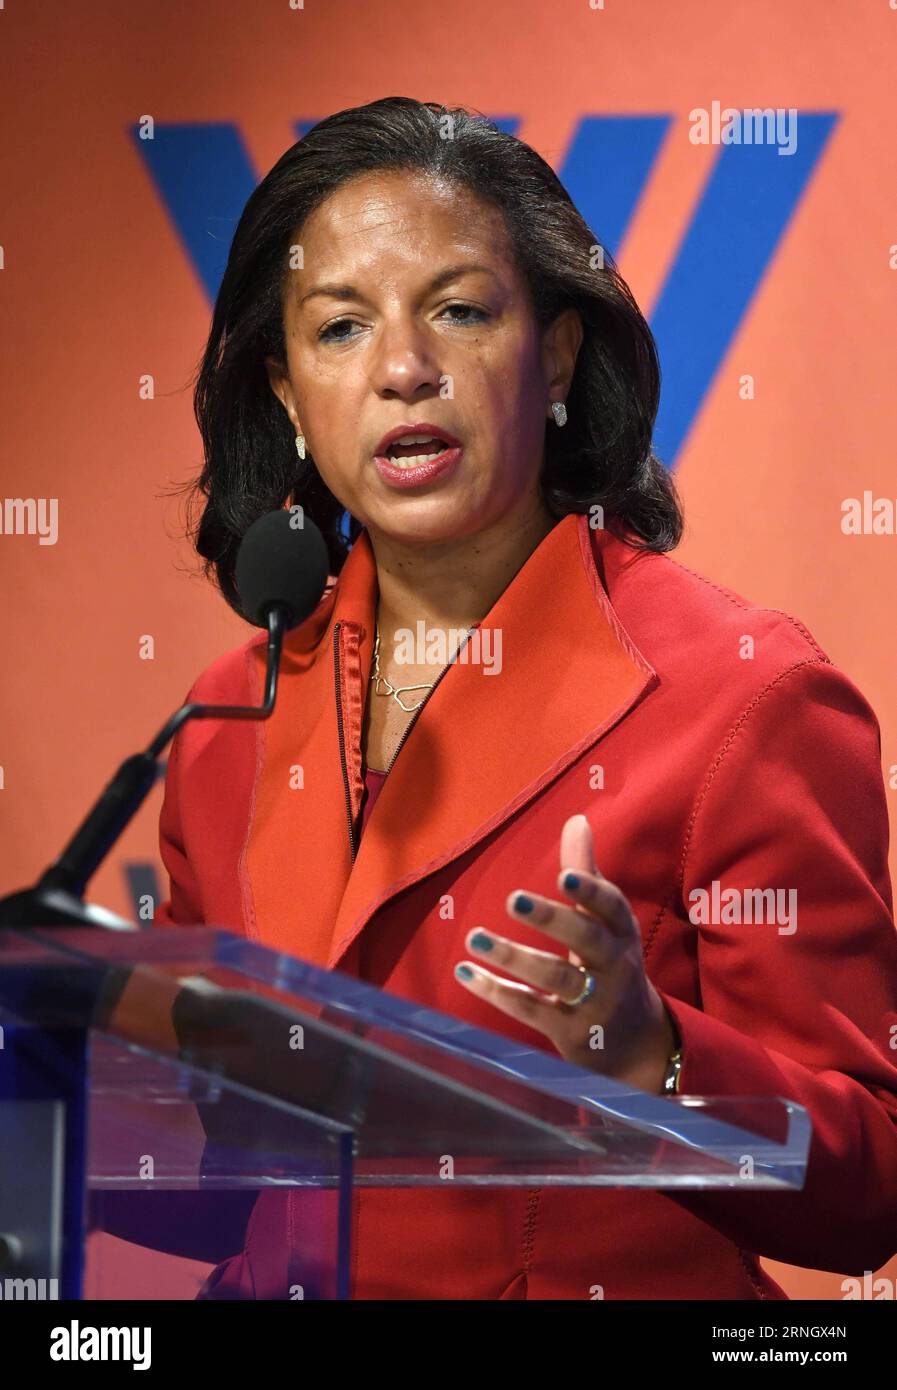 Susan Rice spricht im Wilson Center in Washington 161014 -- WASHINGTON D.C., Oct. 14, 2016 -- U.S. National Security Advisor Susan Rice speaks on the new presidential action on Cuba at the Wilson Center in Washington D.C., the United States, Oct. 14, 2016. The United States announced Friday it would further lift sanctions on Cuba to facilitate trade as well as scientific and humanitarian exchanges between the two countries.  U.S-WASHINGTON D.C.-CUBA-SANCTIONS LIFTED YinxBogu PUBLICATIONxNOTxINxCHN Stock Photo